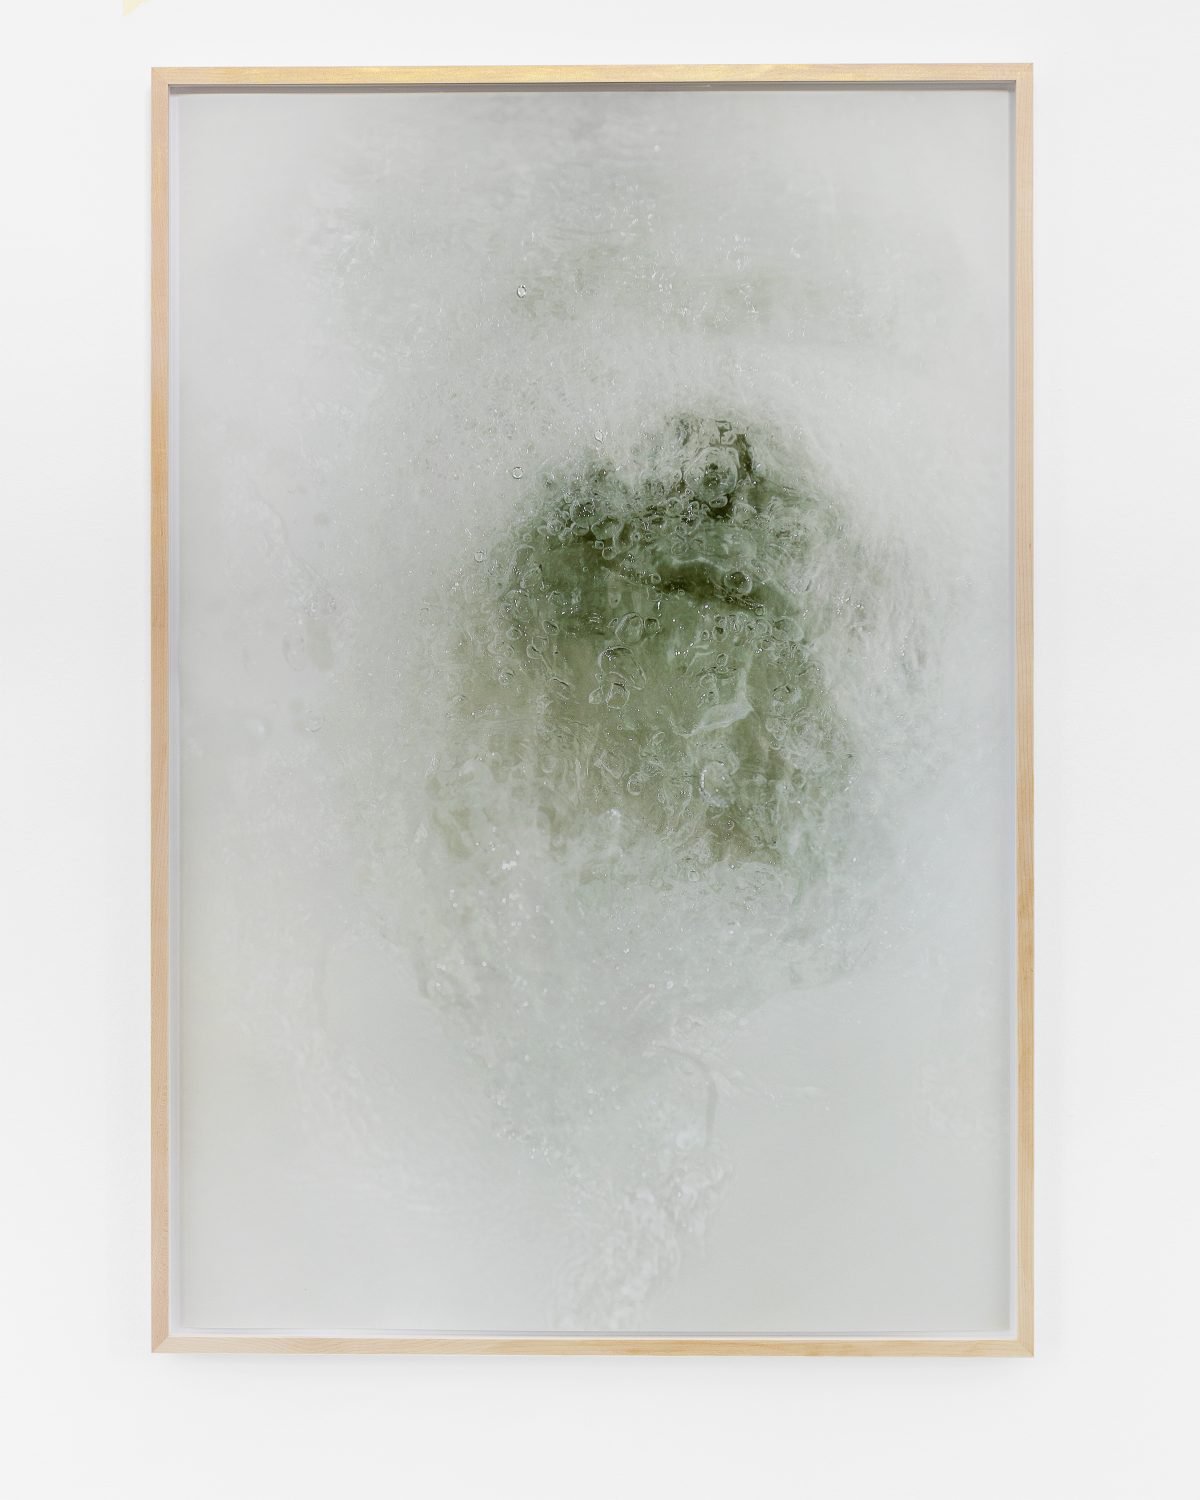 Lisa HolzerFlush (with and without flash), 2019Pigment print on cotton paper, Crystal Clear 202/1 polyurethane on glass, acrylic metallic paint on wood110.3 x 79 cm